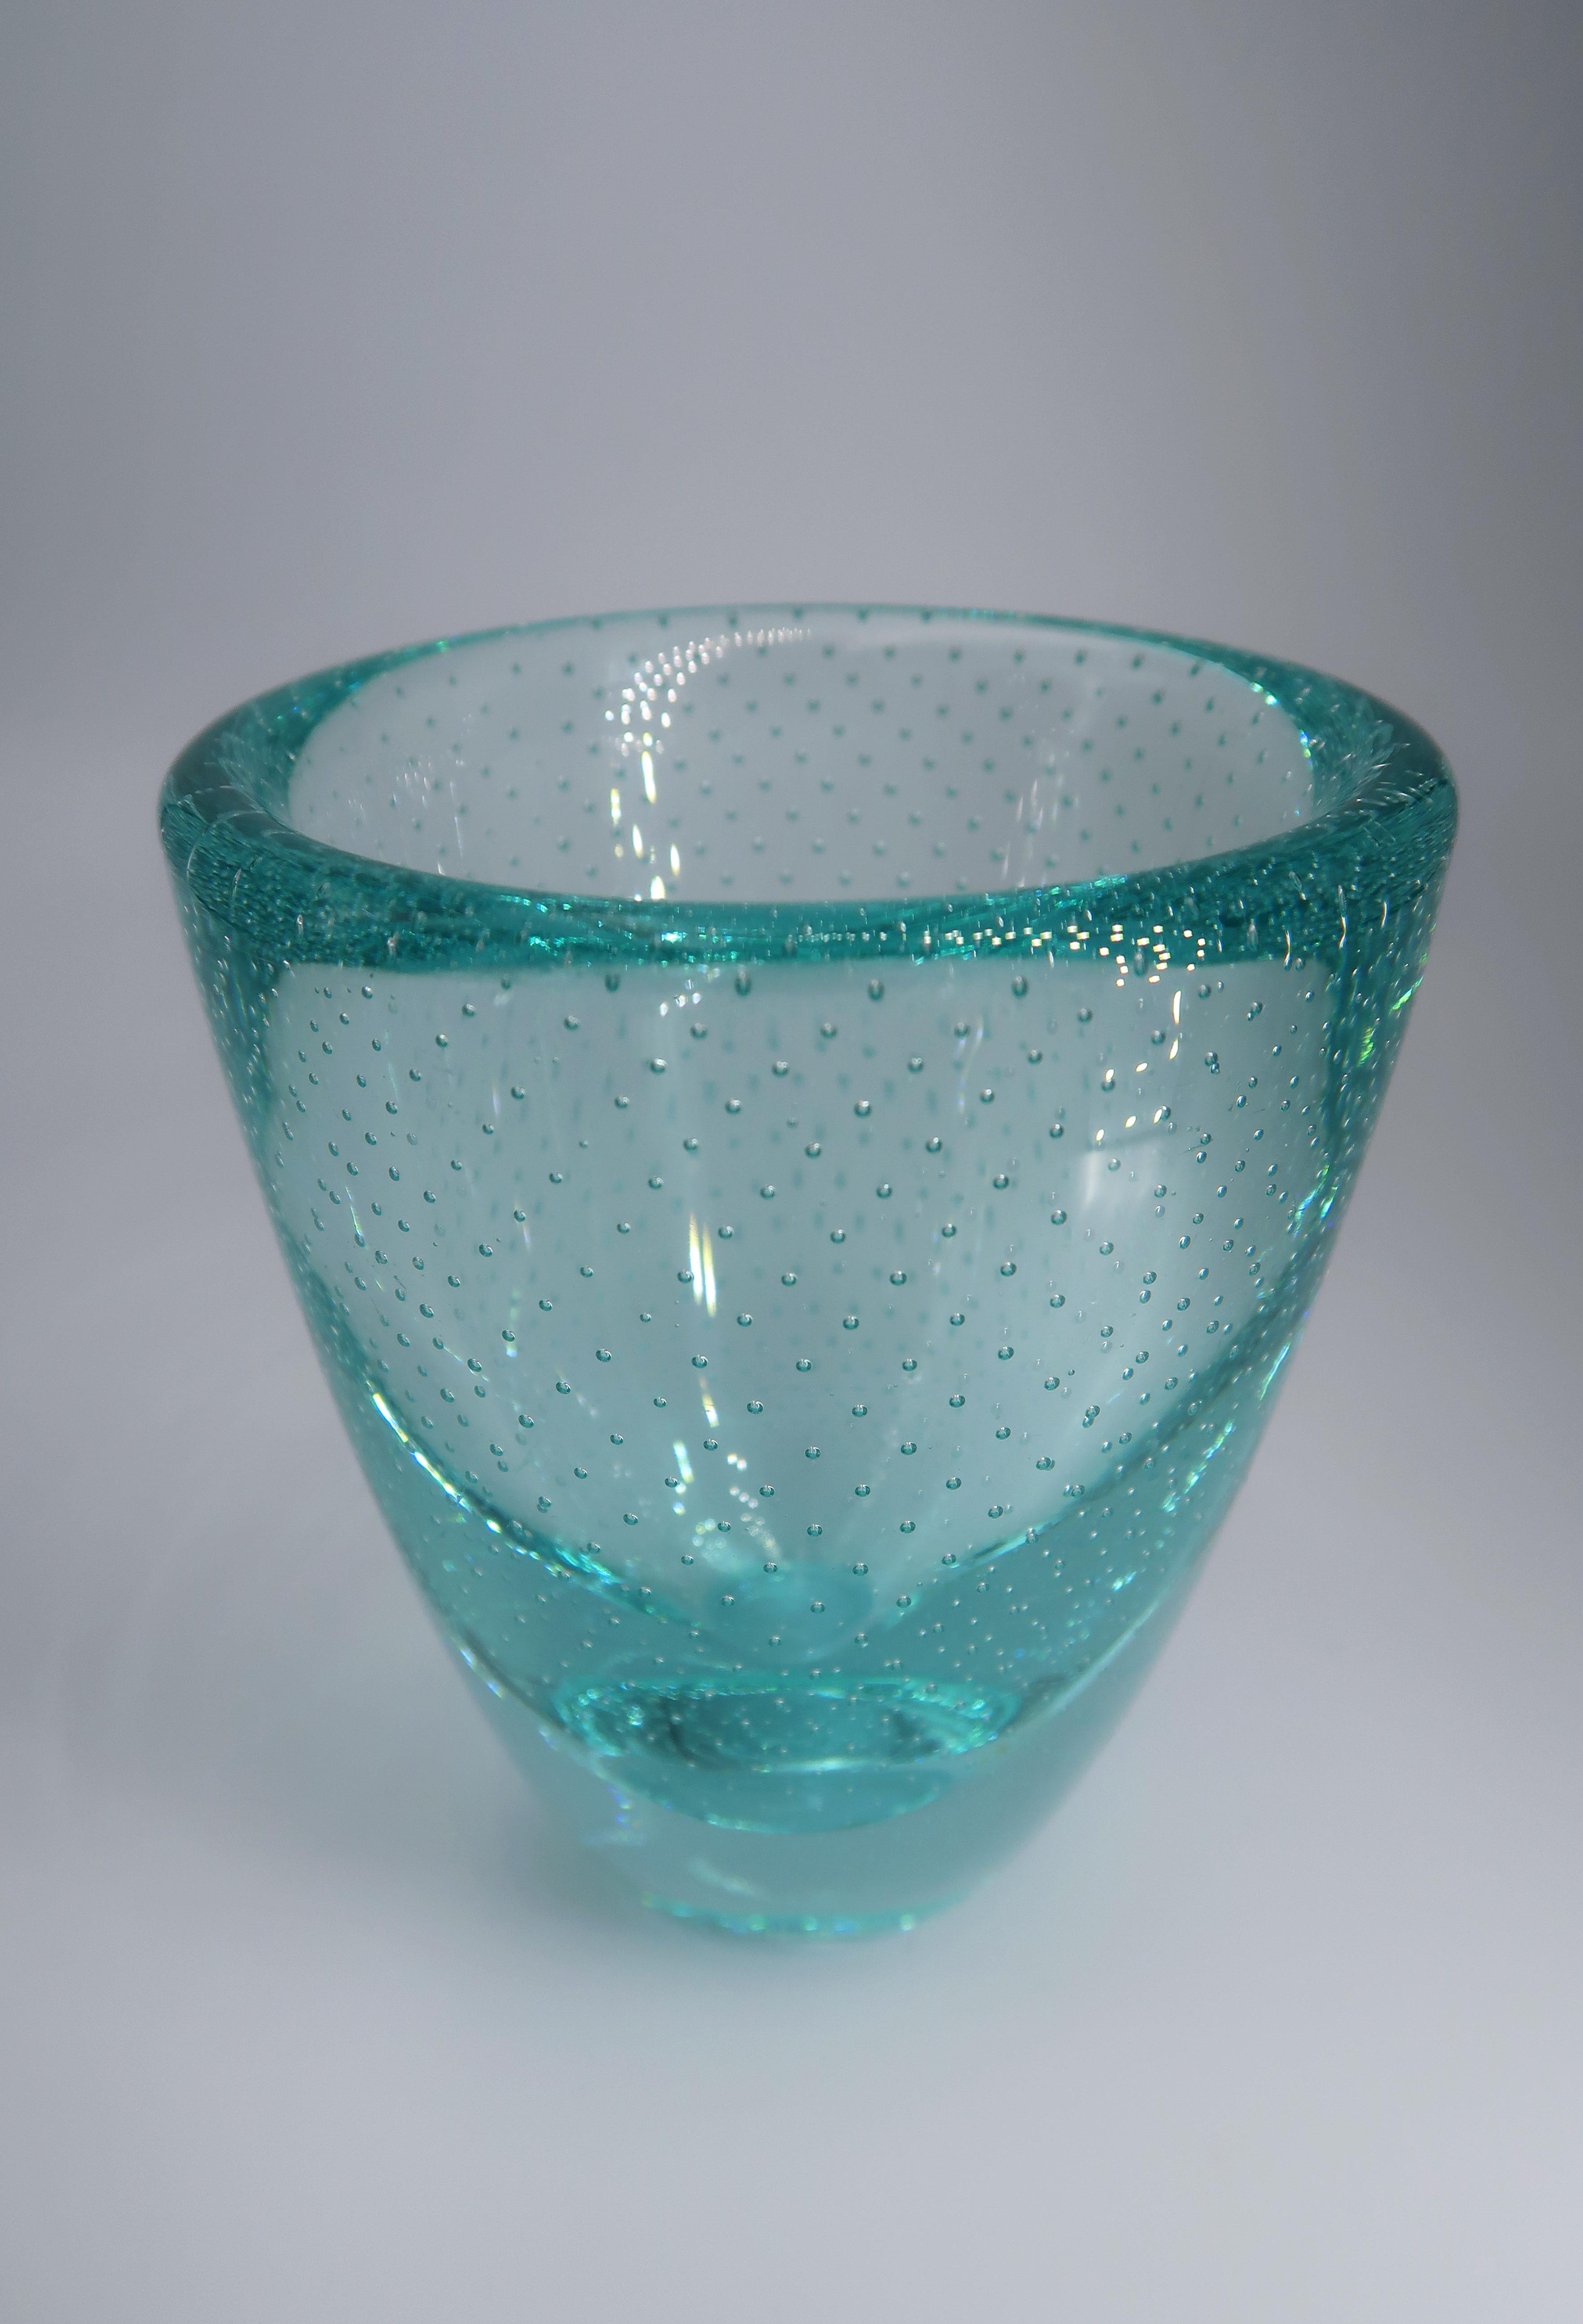 Beautiful midcentury smooth art glass decorative bowl with small, organic underwater like bubbles. 1960s Nordic modern piece in thick and solid aqua green glass. Beautiful vintage condition with small signs of wear - see photos. No chips or cracks.